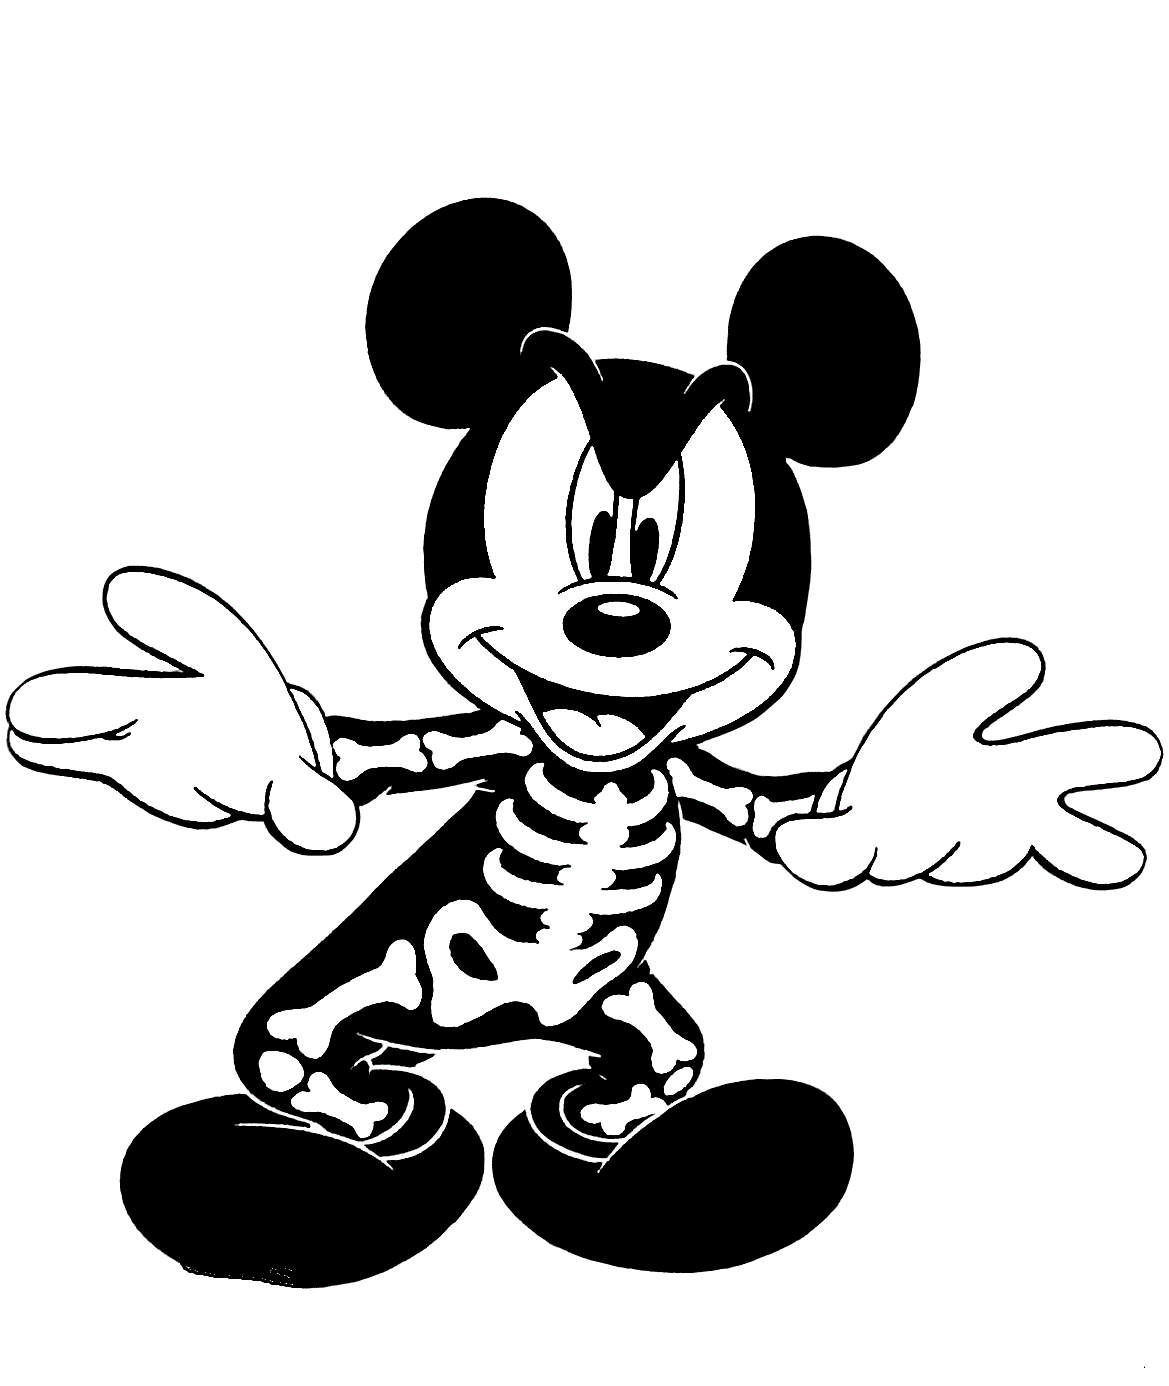 Disney Halloween Coloring Pages - Best Coloring Pages For Kids